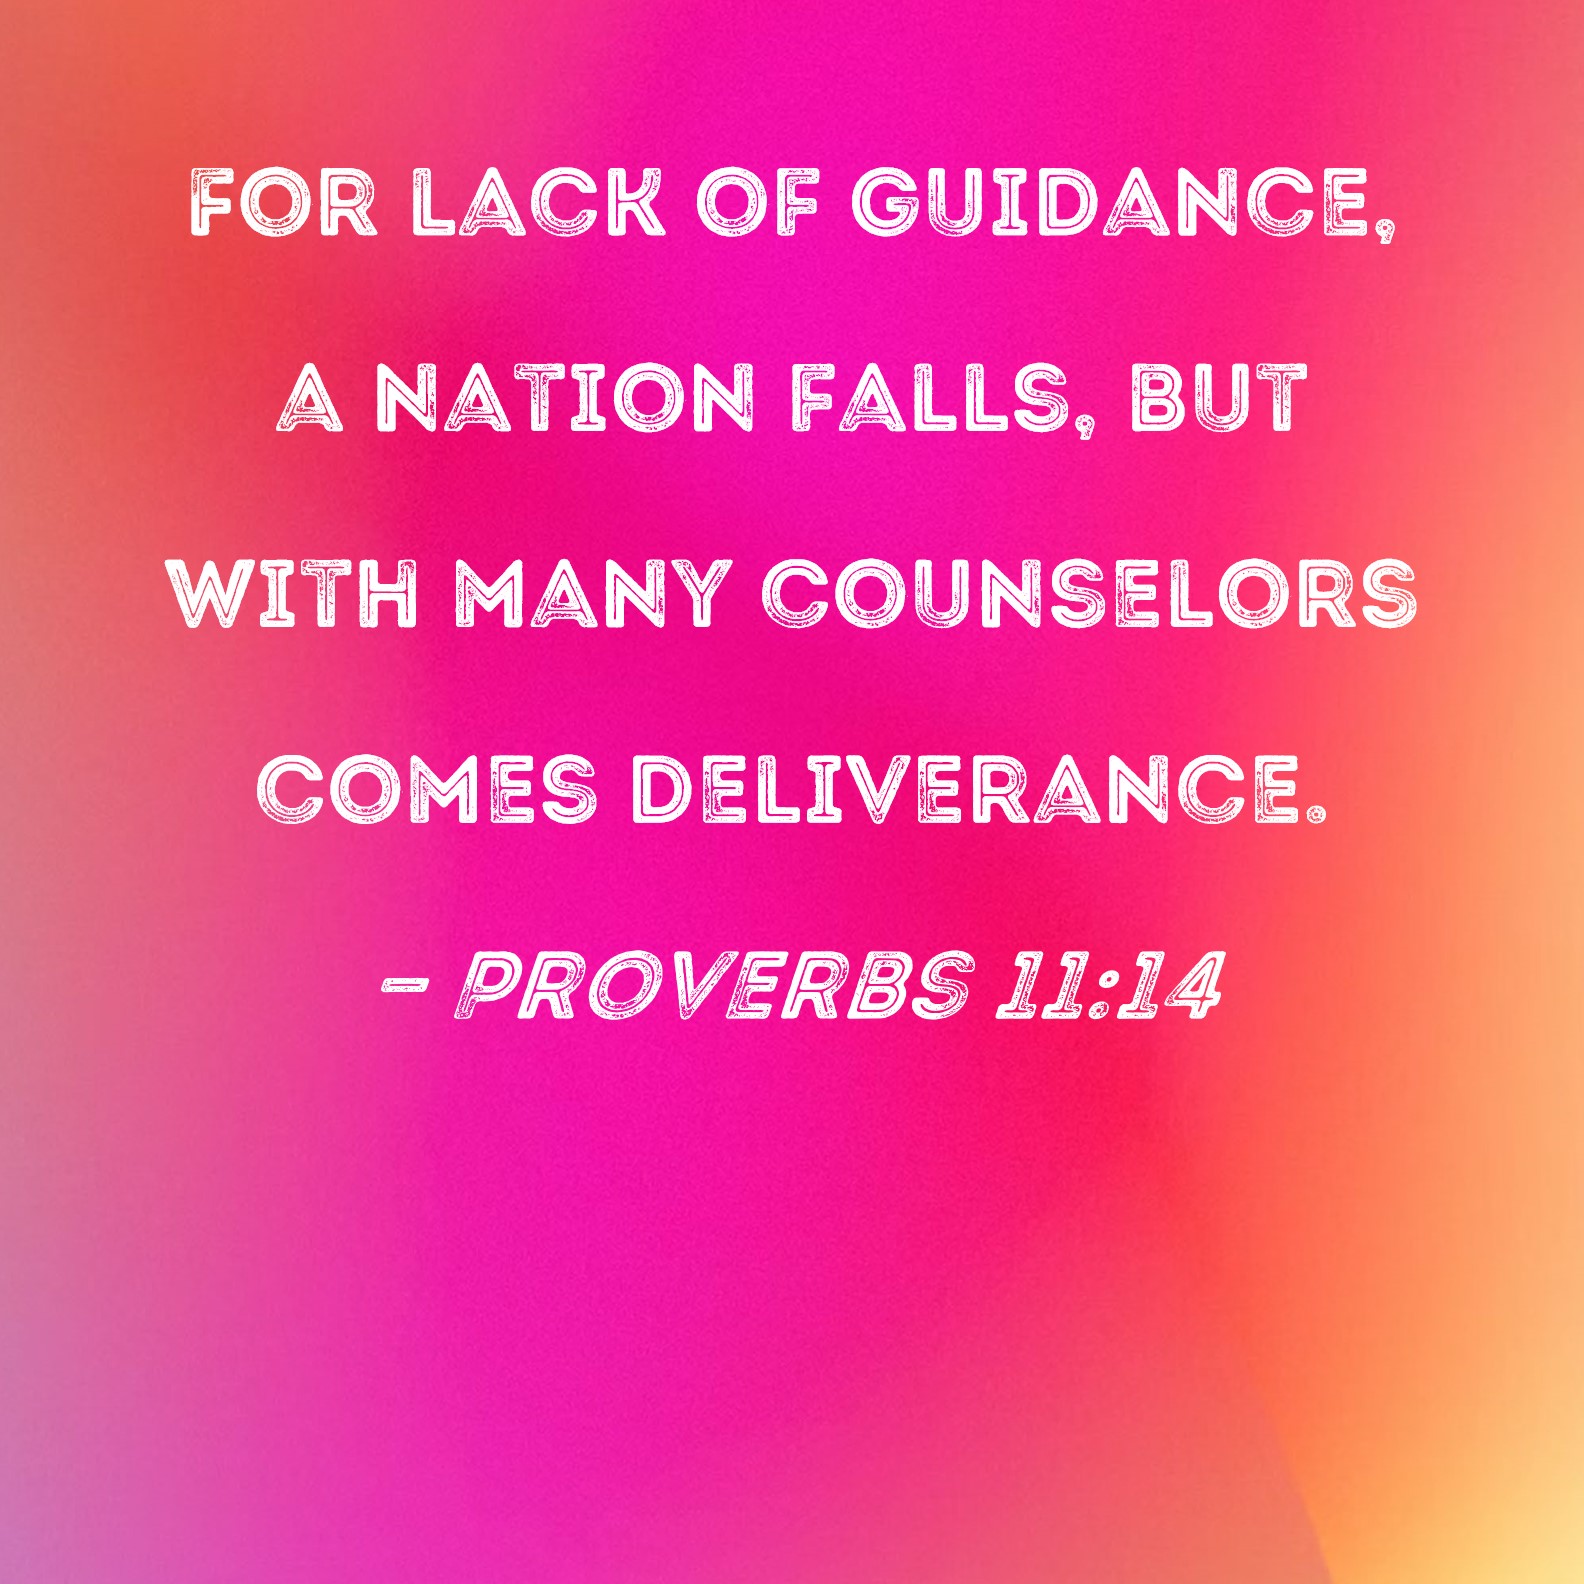 Proverbs 11:14 For lack of guidance, a nation falls, but with many